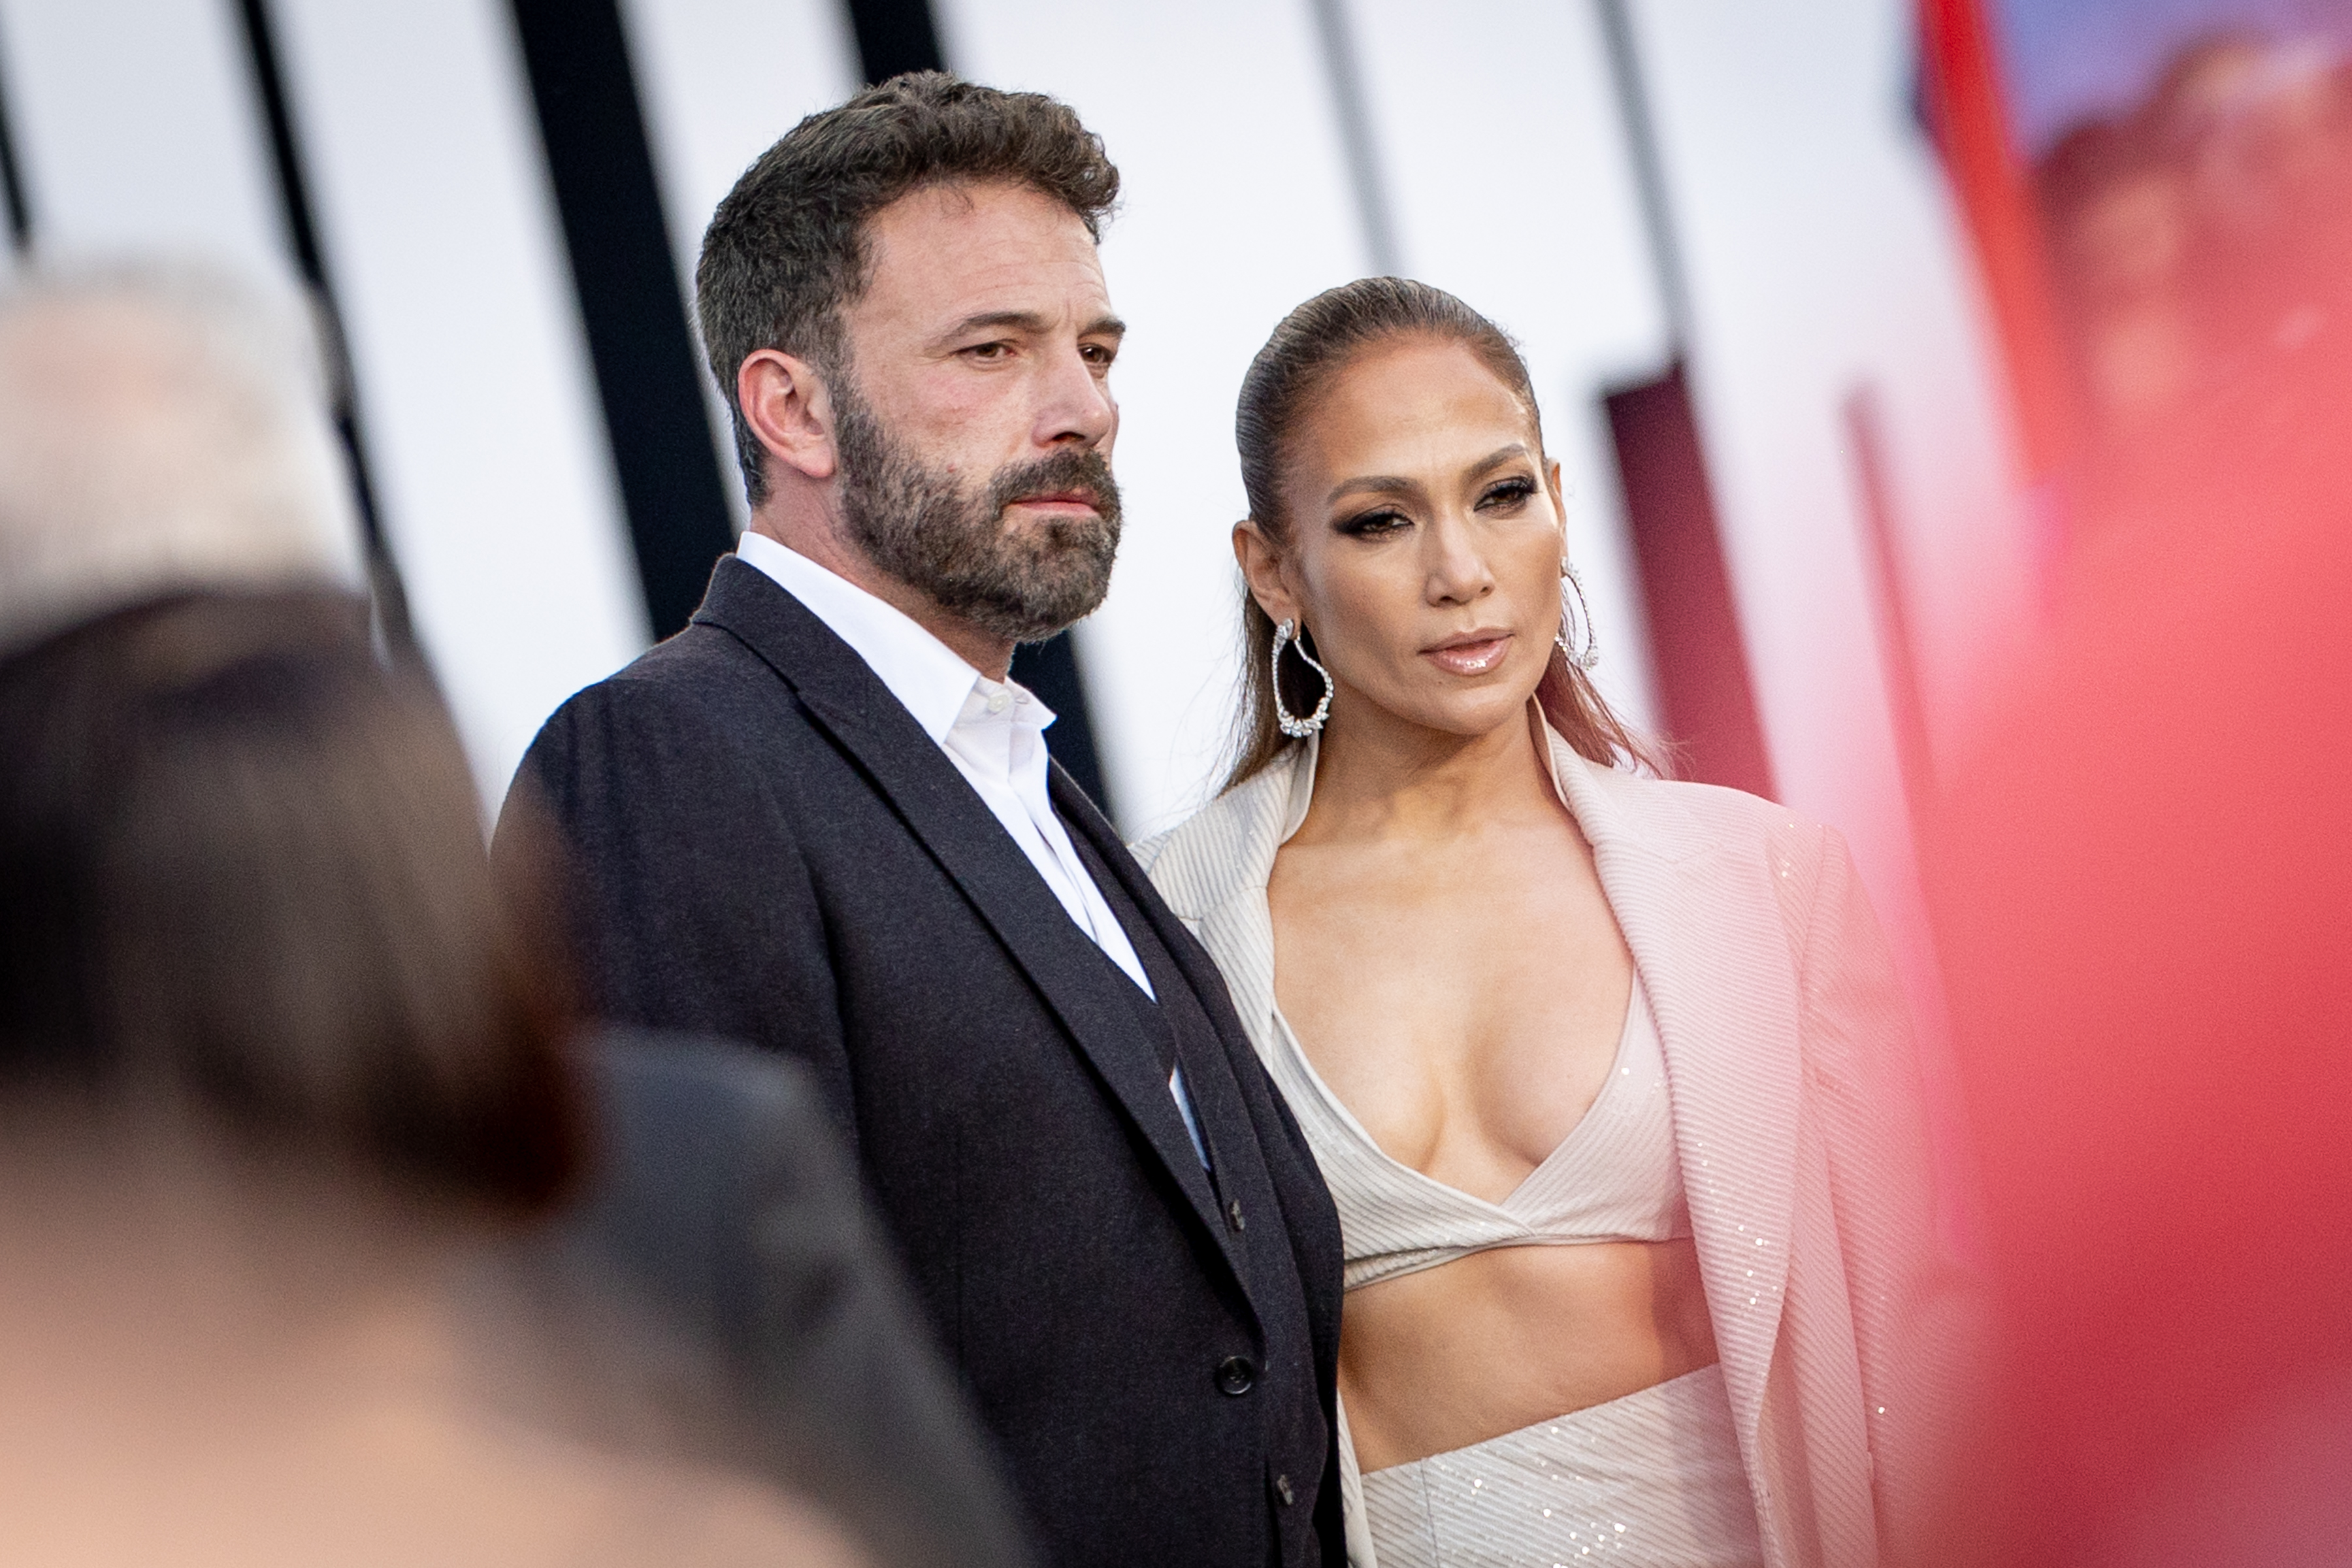 Ben Affleck and Jennifer Lopez attend the premiere of Netflix's 'The Mother' at Westwood Regency Village Theater in Los Angeles, California, on May 10, 2023. | Source: Getty Images